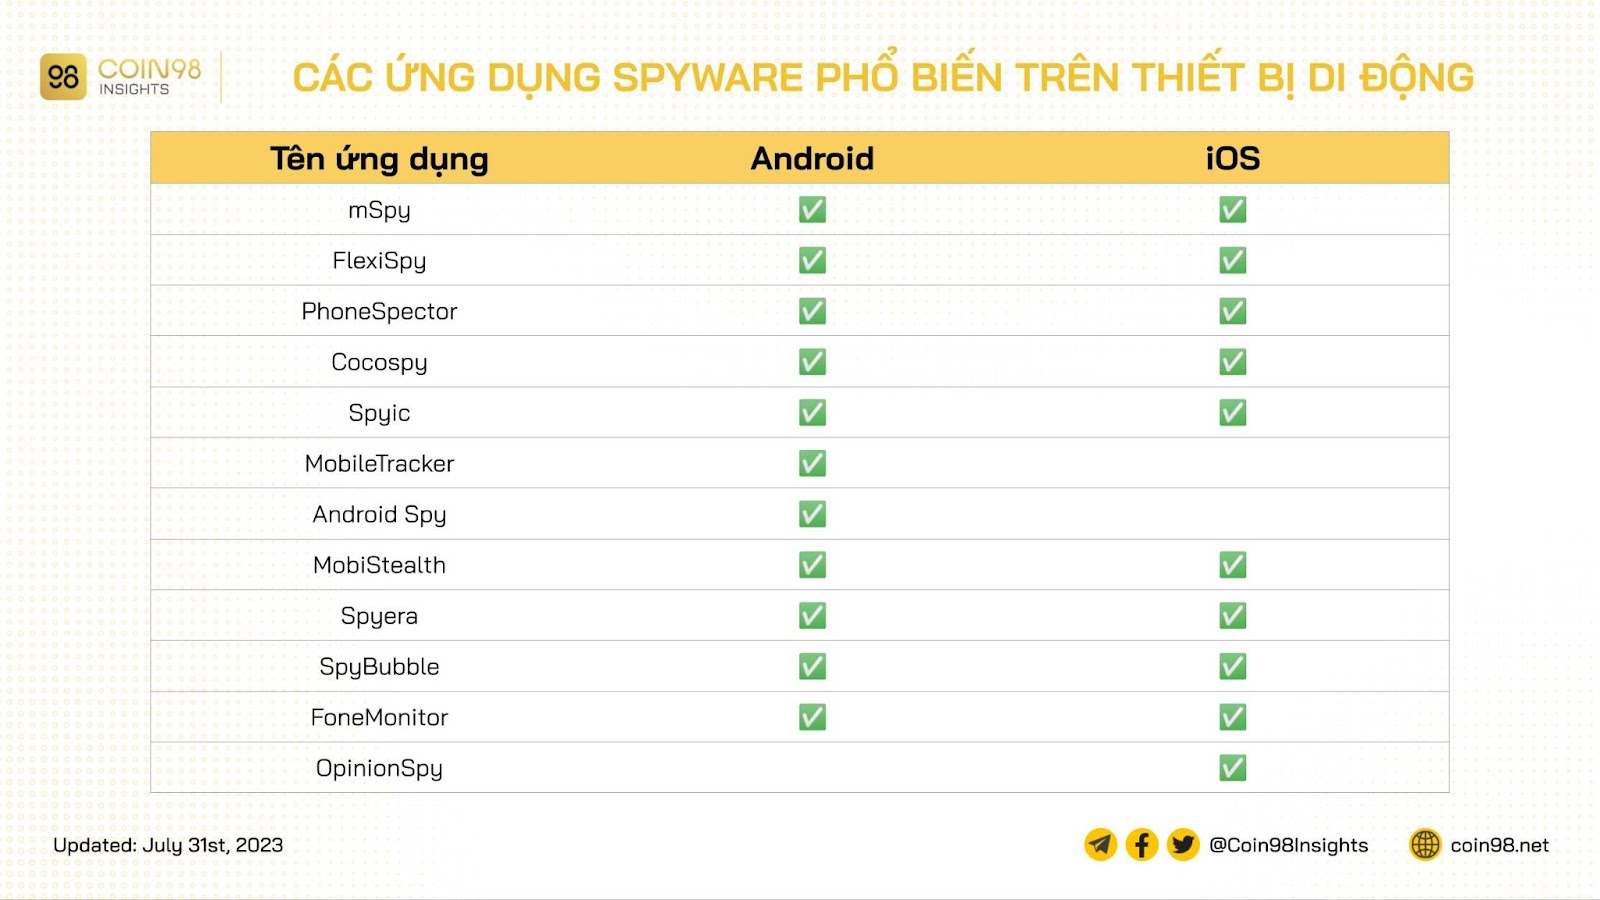 ứng dụng spyware